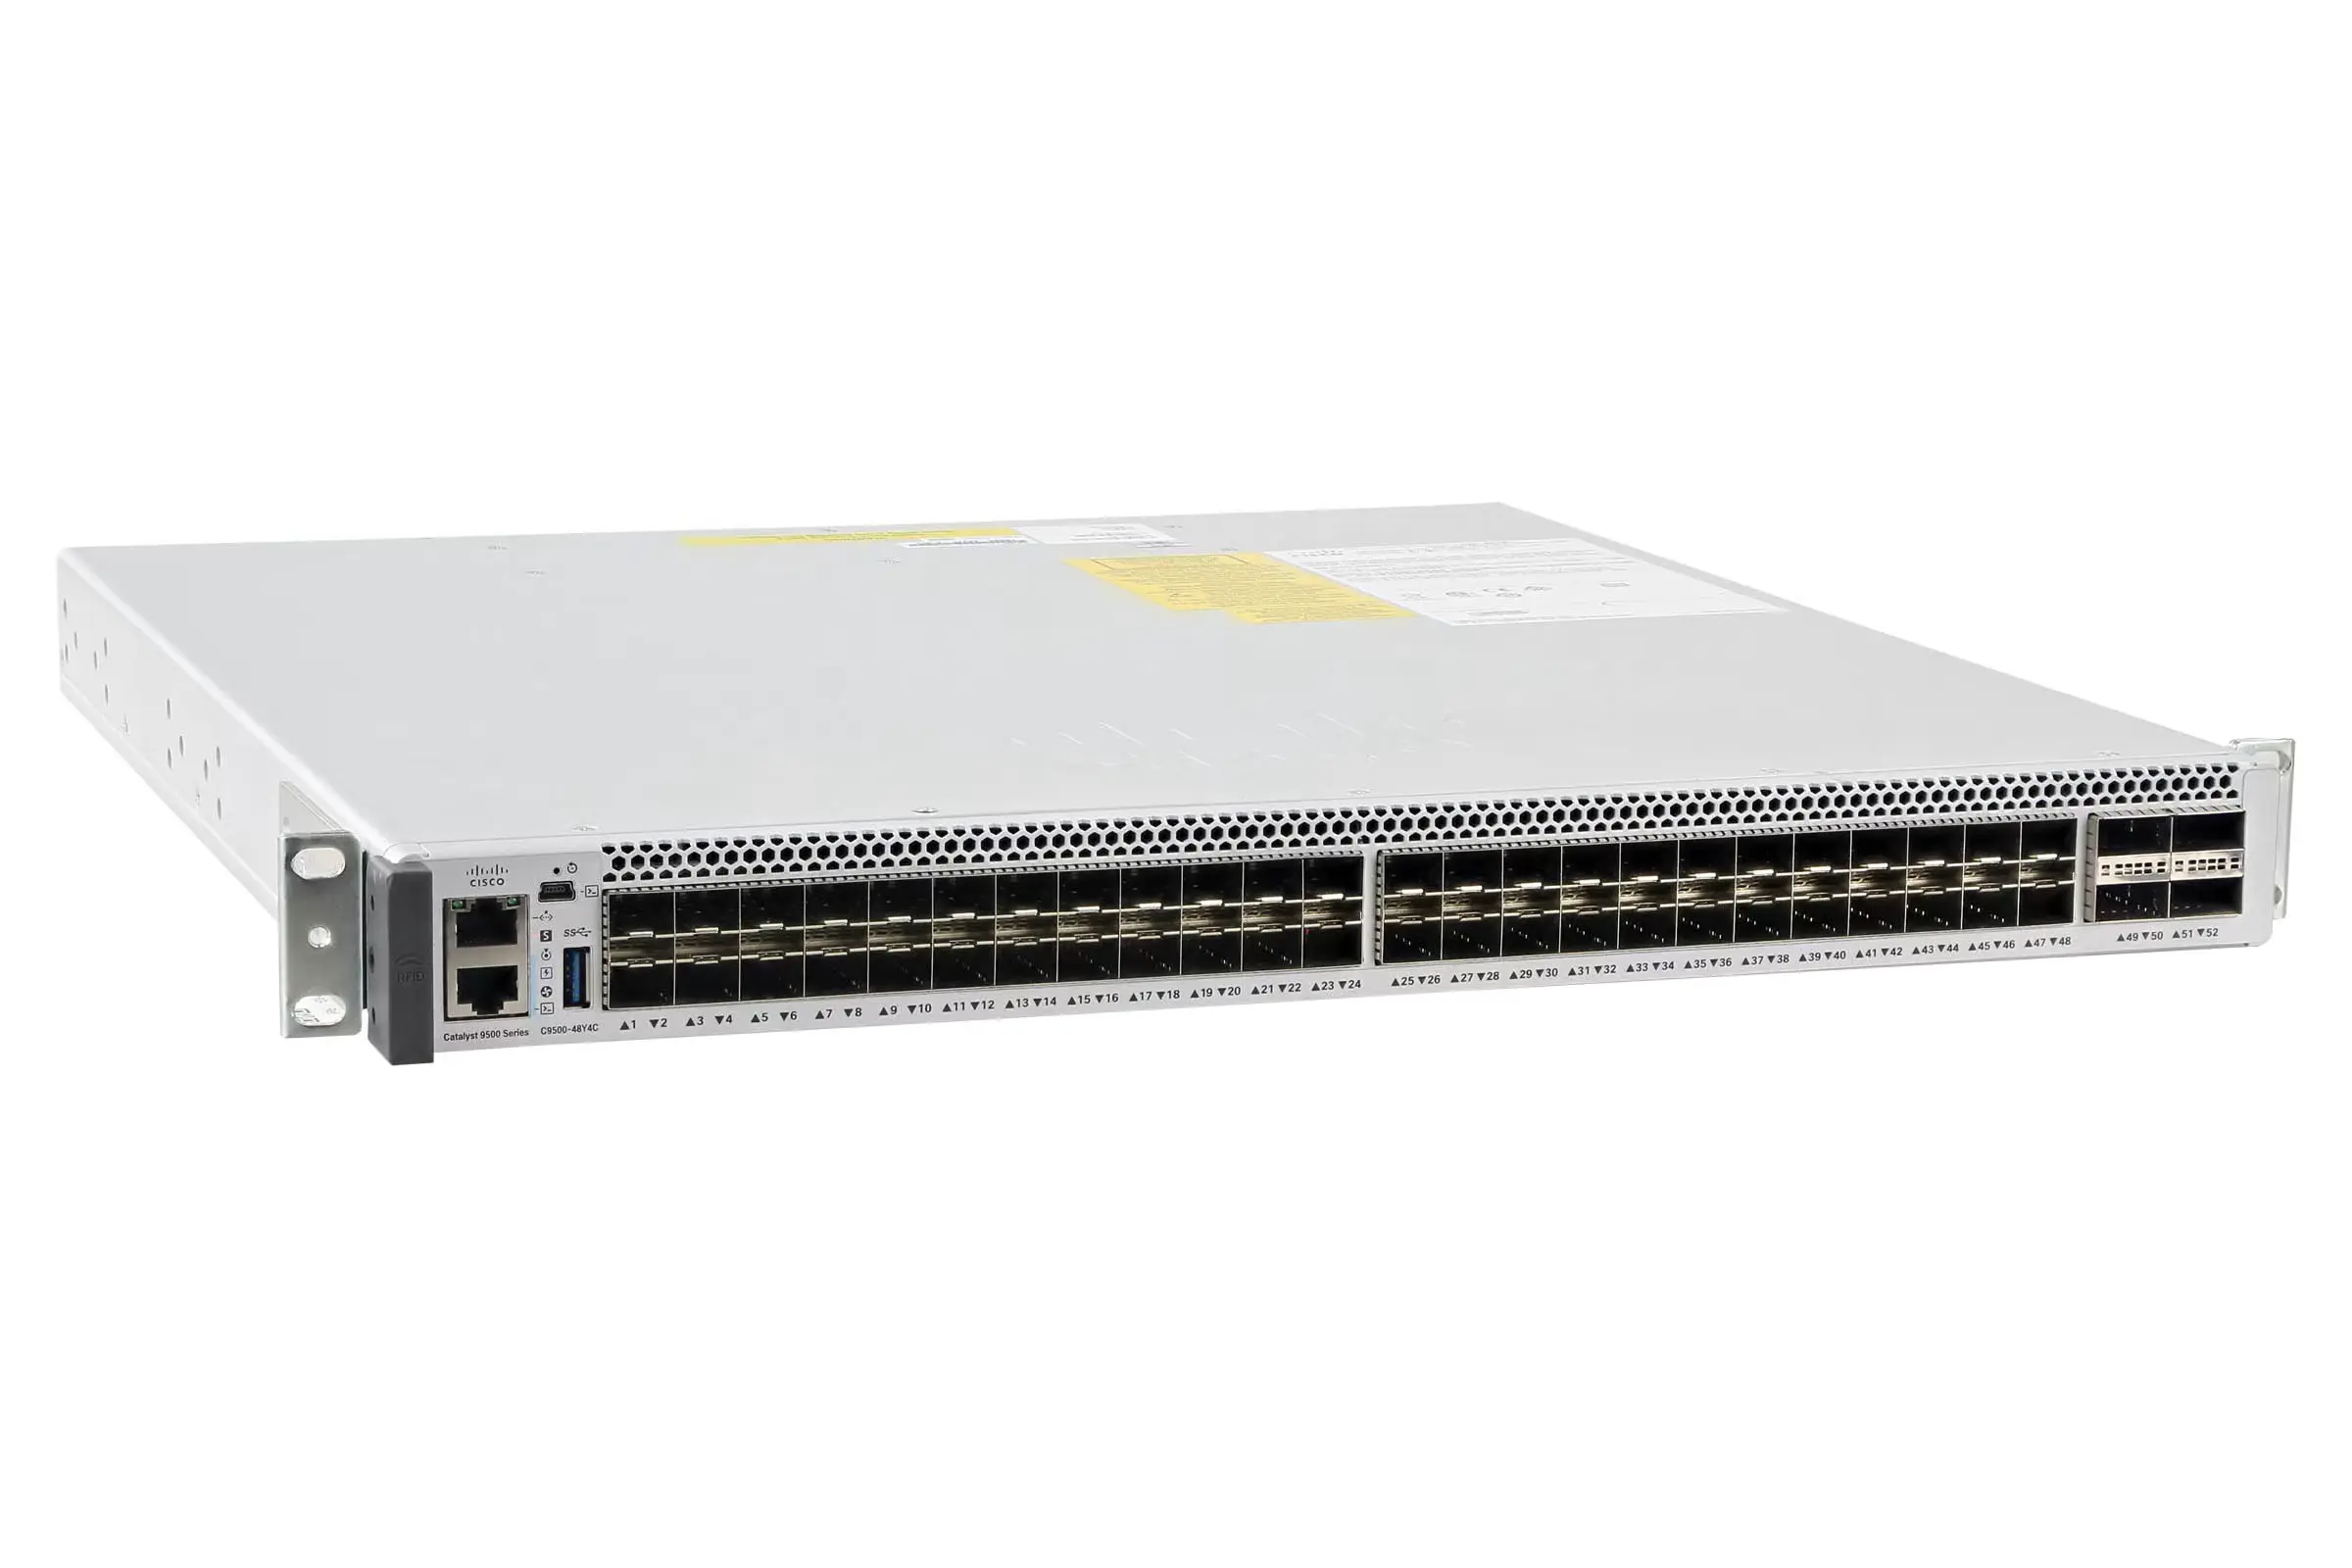 Cisco Catalyst C9500-48Y4C-E - Core and Distribution Switch